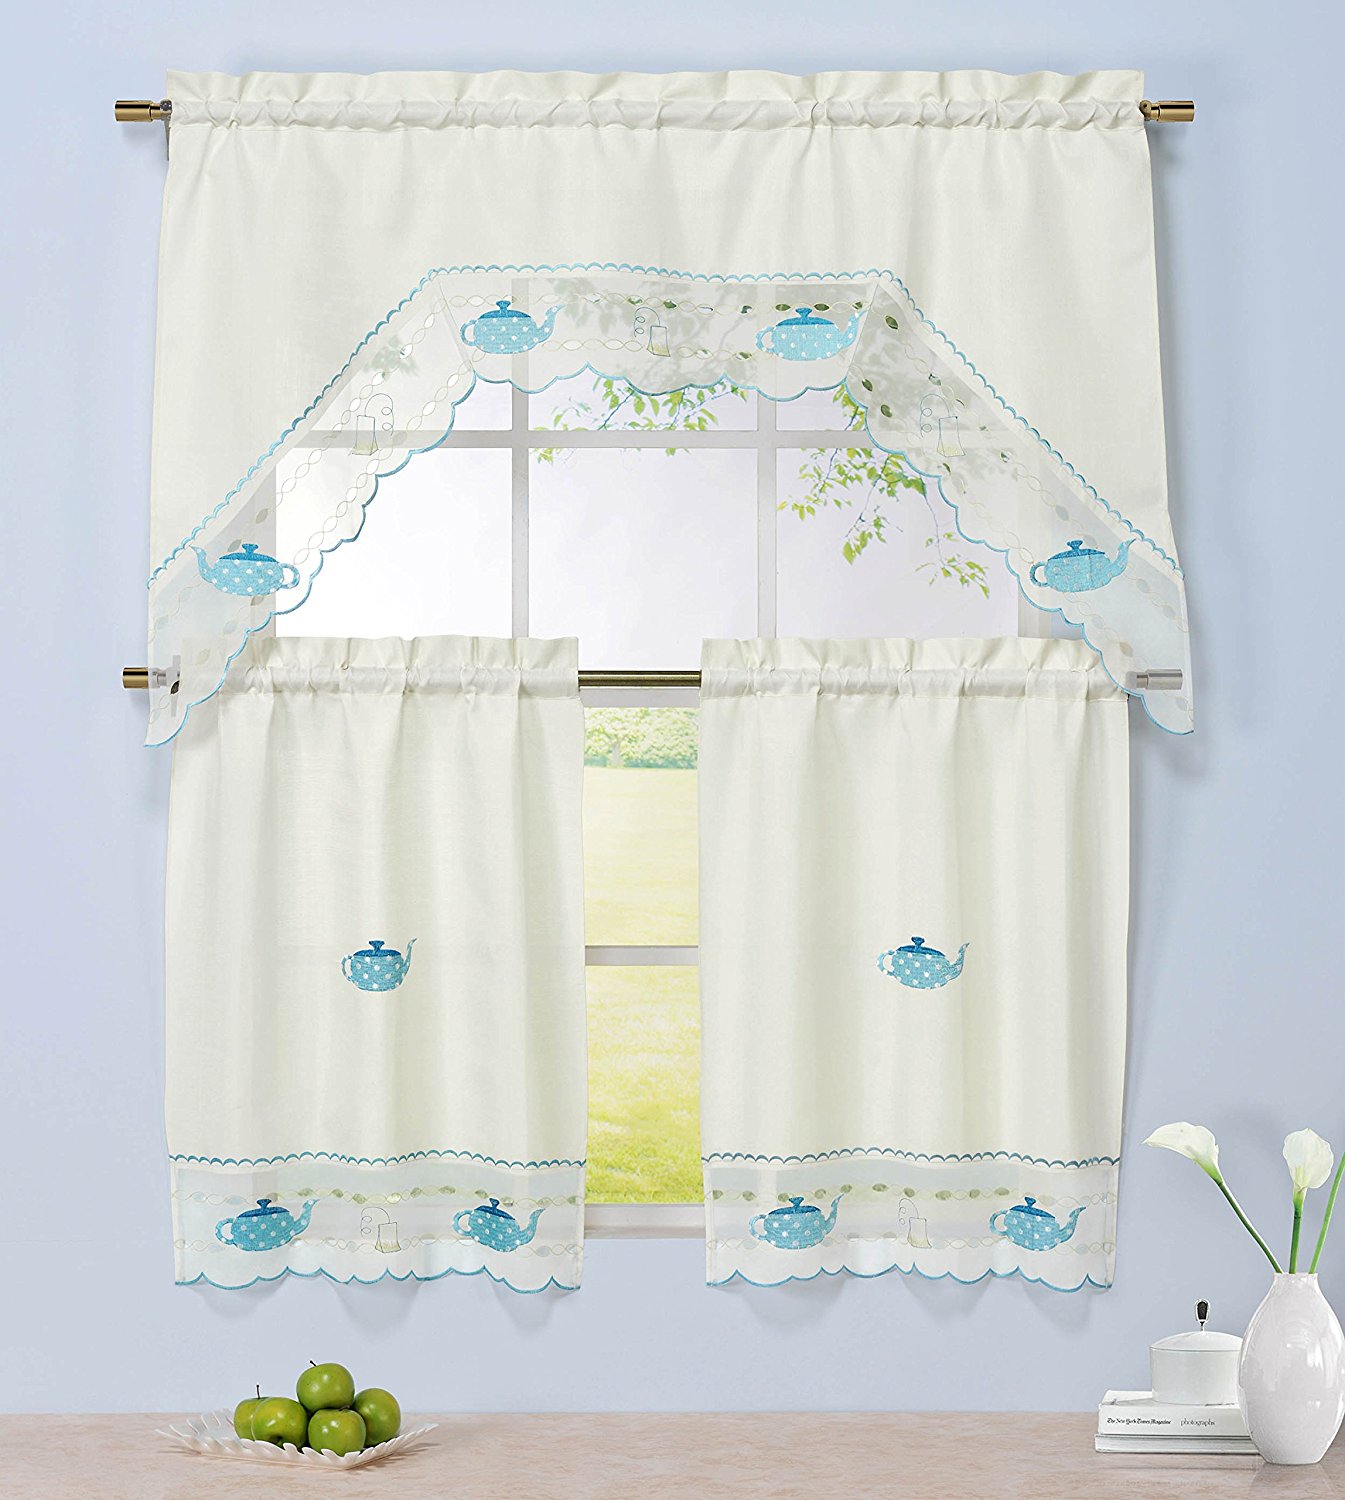 Window Elements Embroidered 3-Piece Kitchen Tier and Valance 60 x 72 Set with Scalloped Border, Tea Party